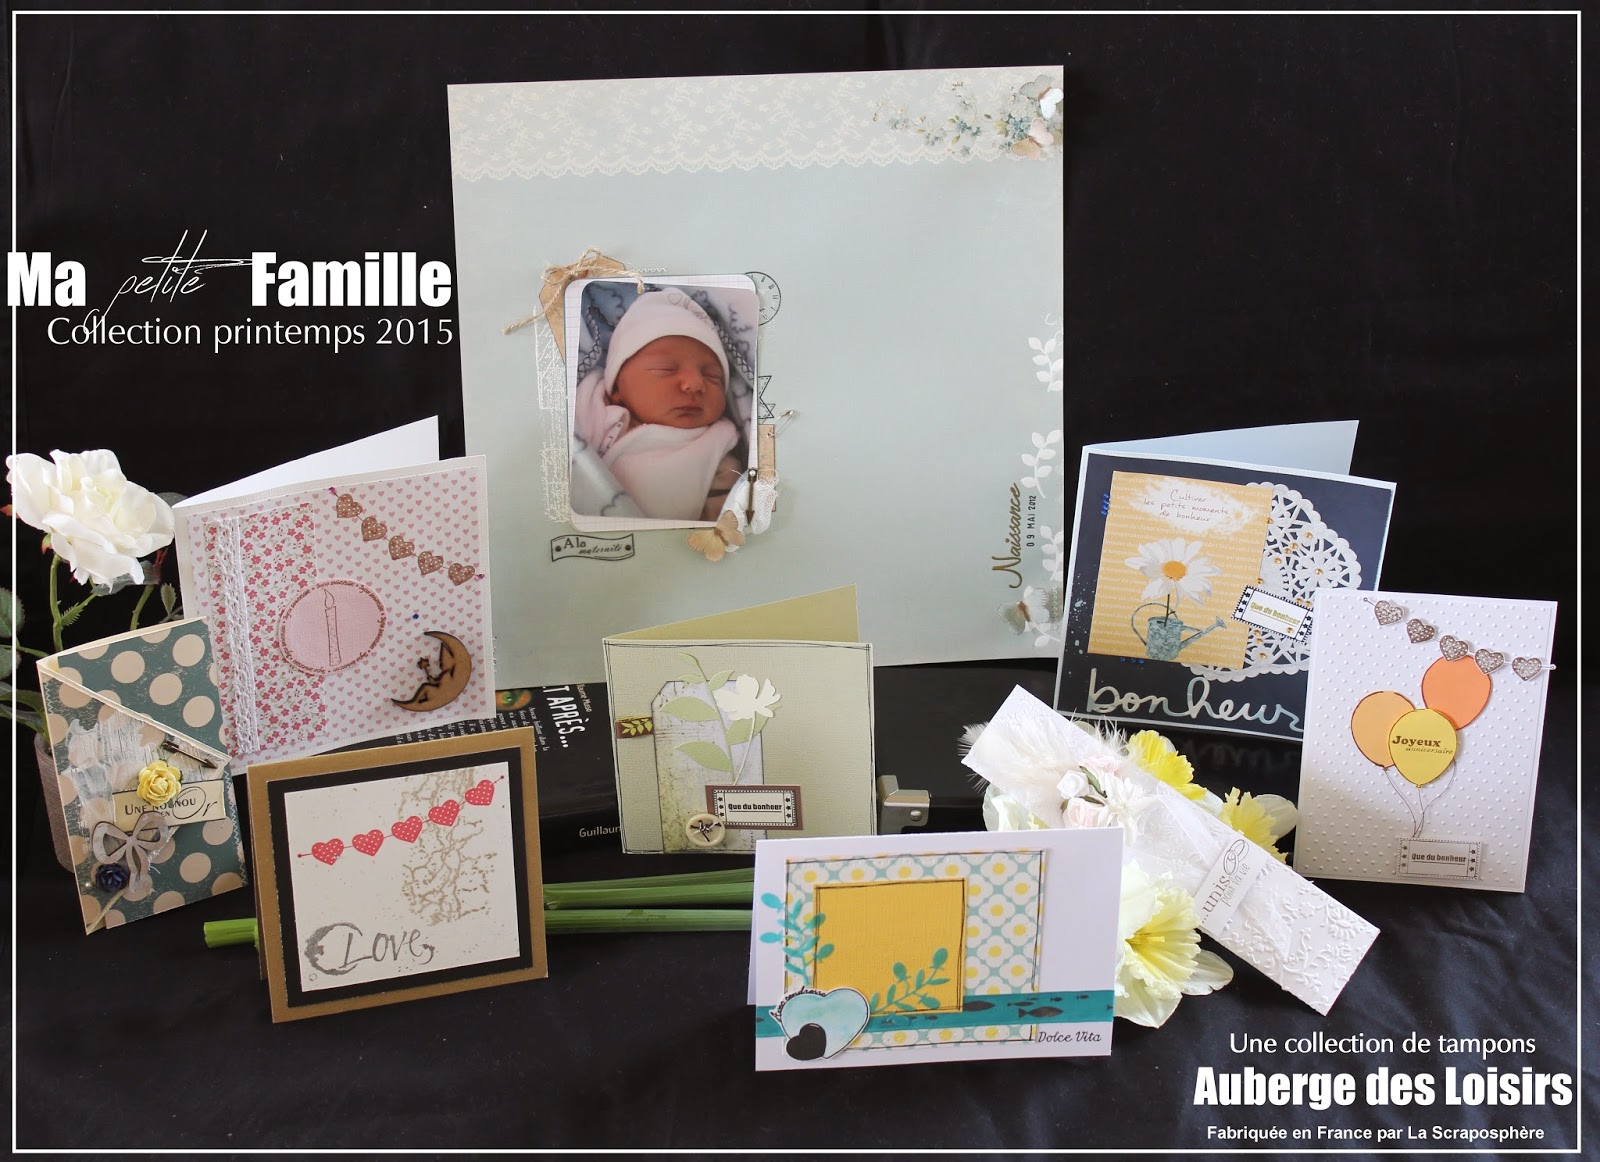 http://aubergedesloisirs.blogspot.fr/2015/03/nouvelle-collection-ma-petite-famille.html